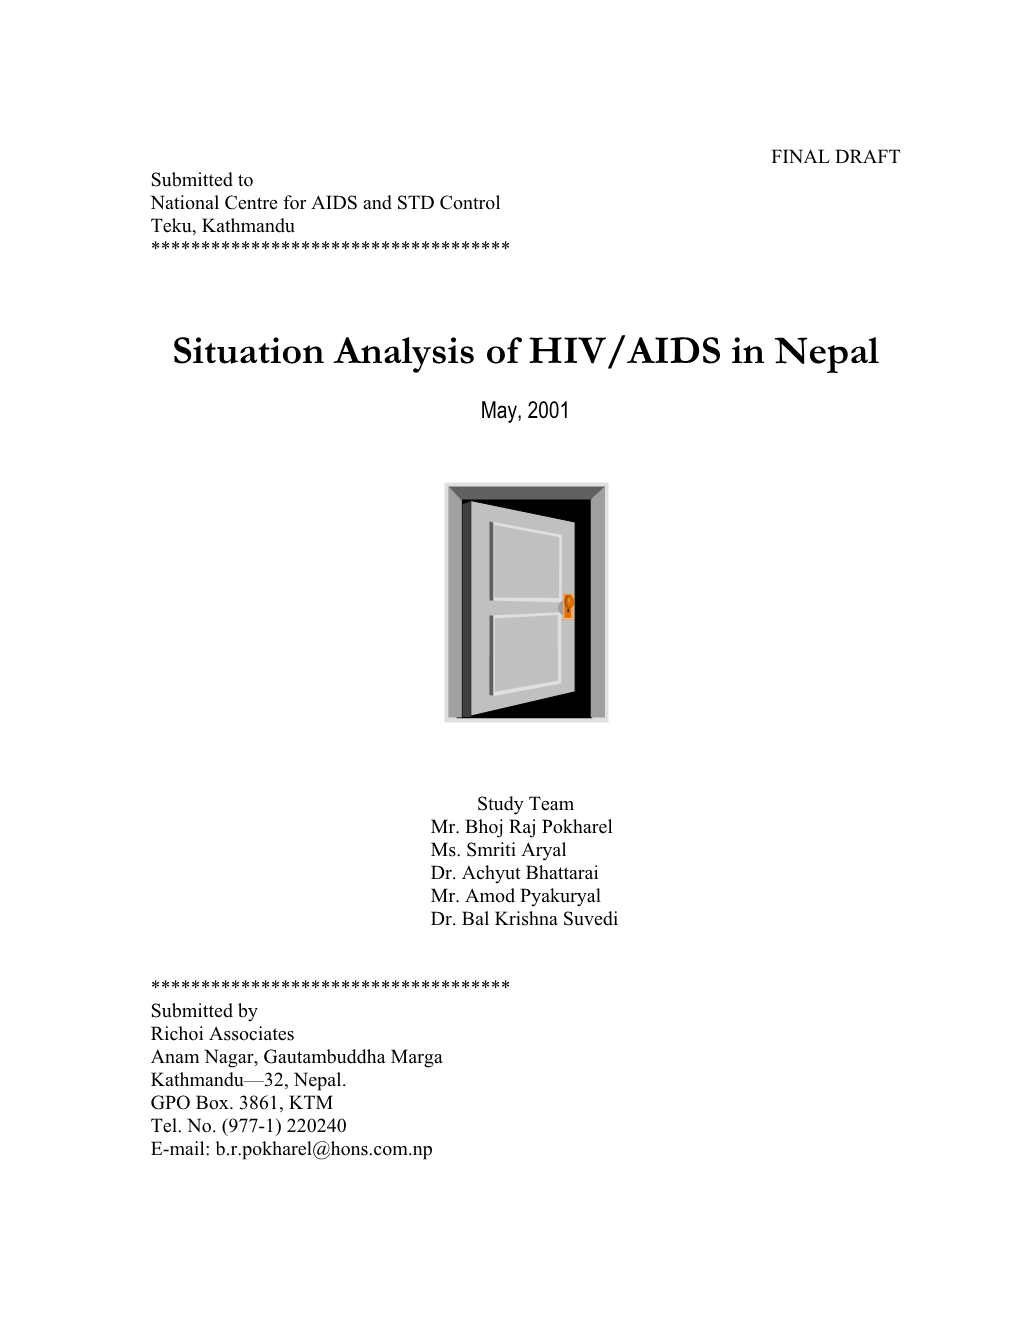 Situation Analysis of HIV/AIDS in Nepal